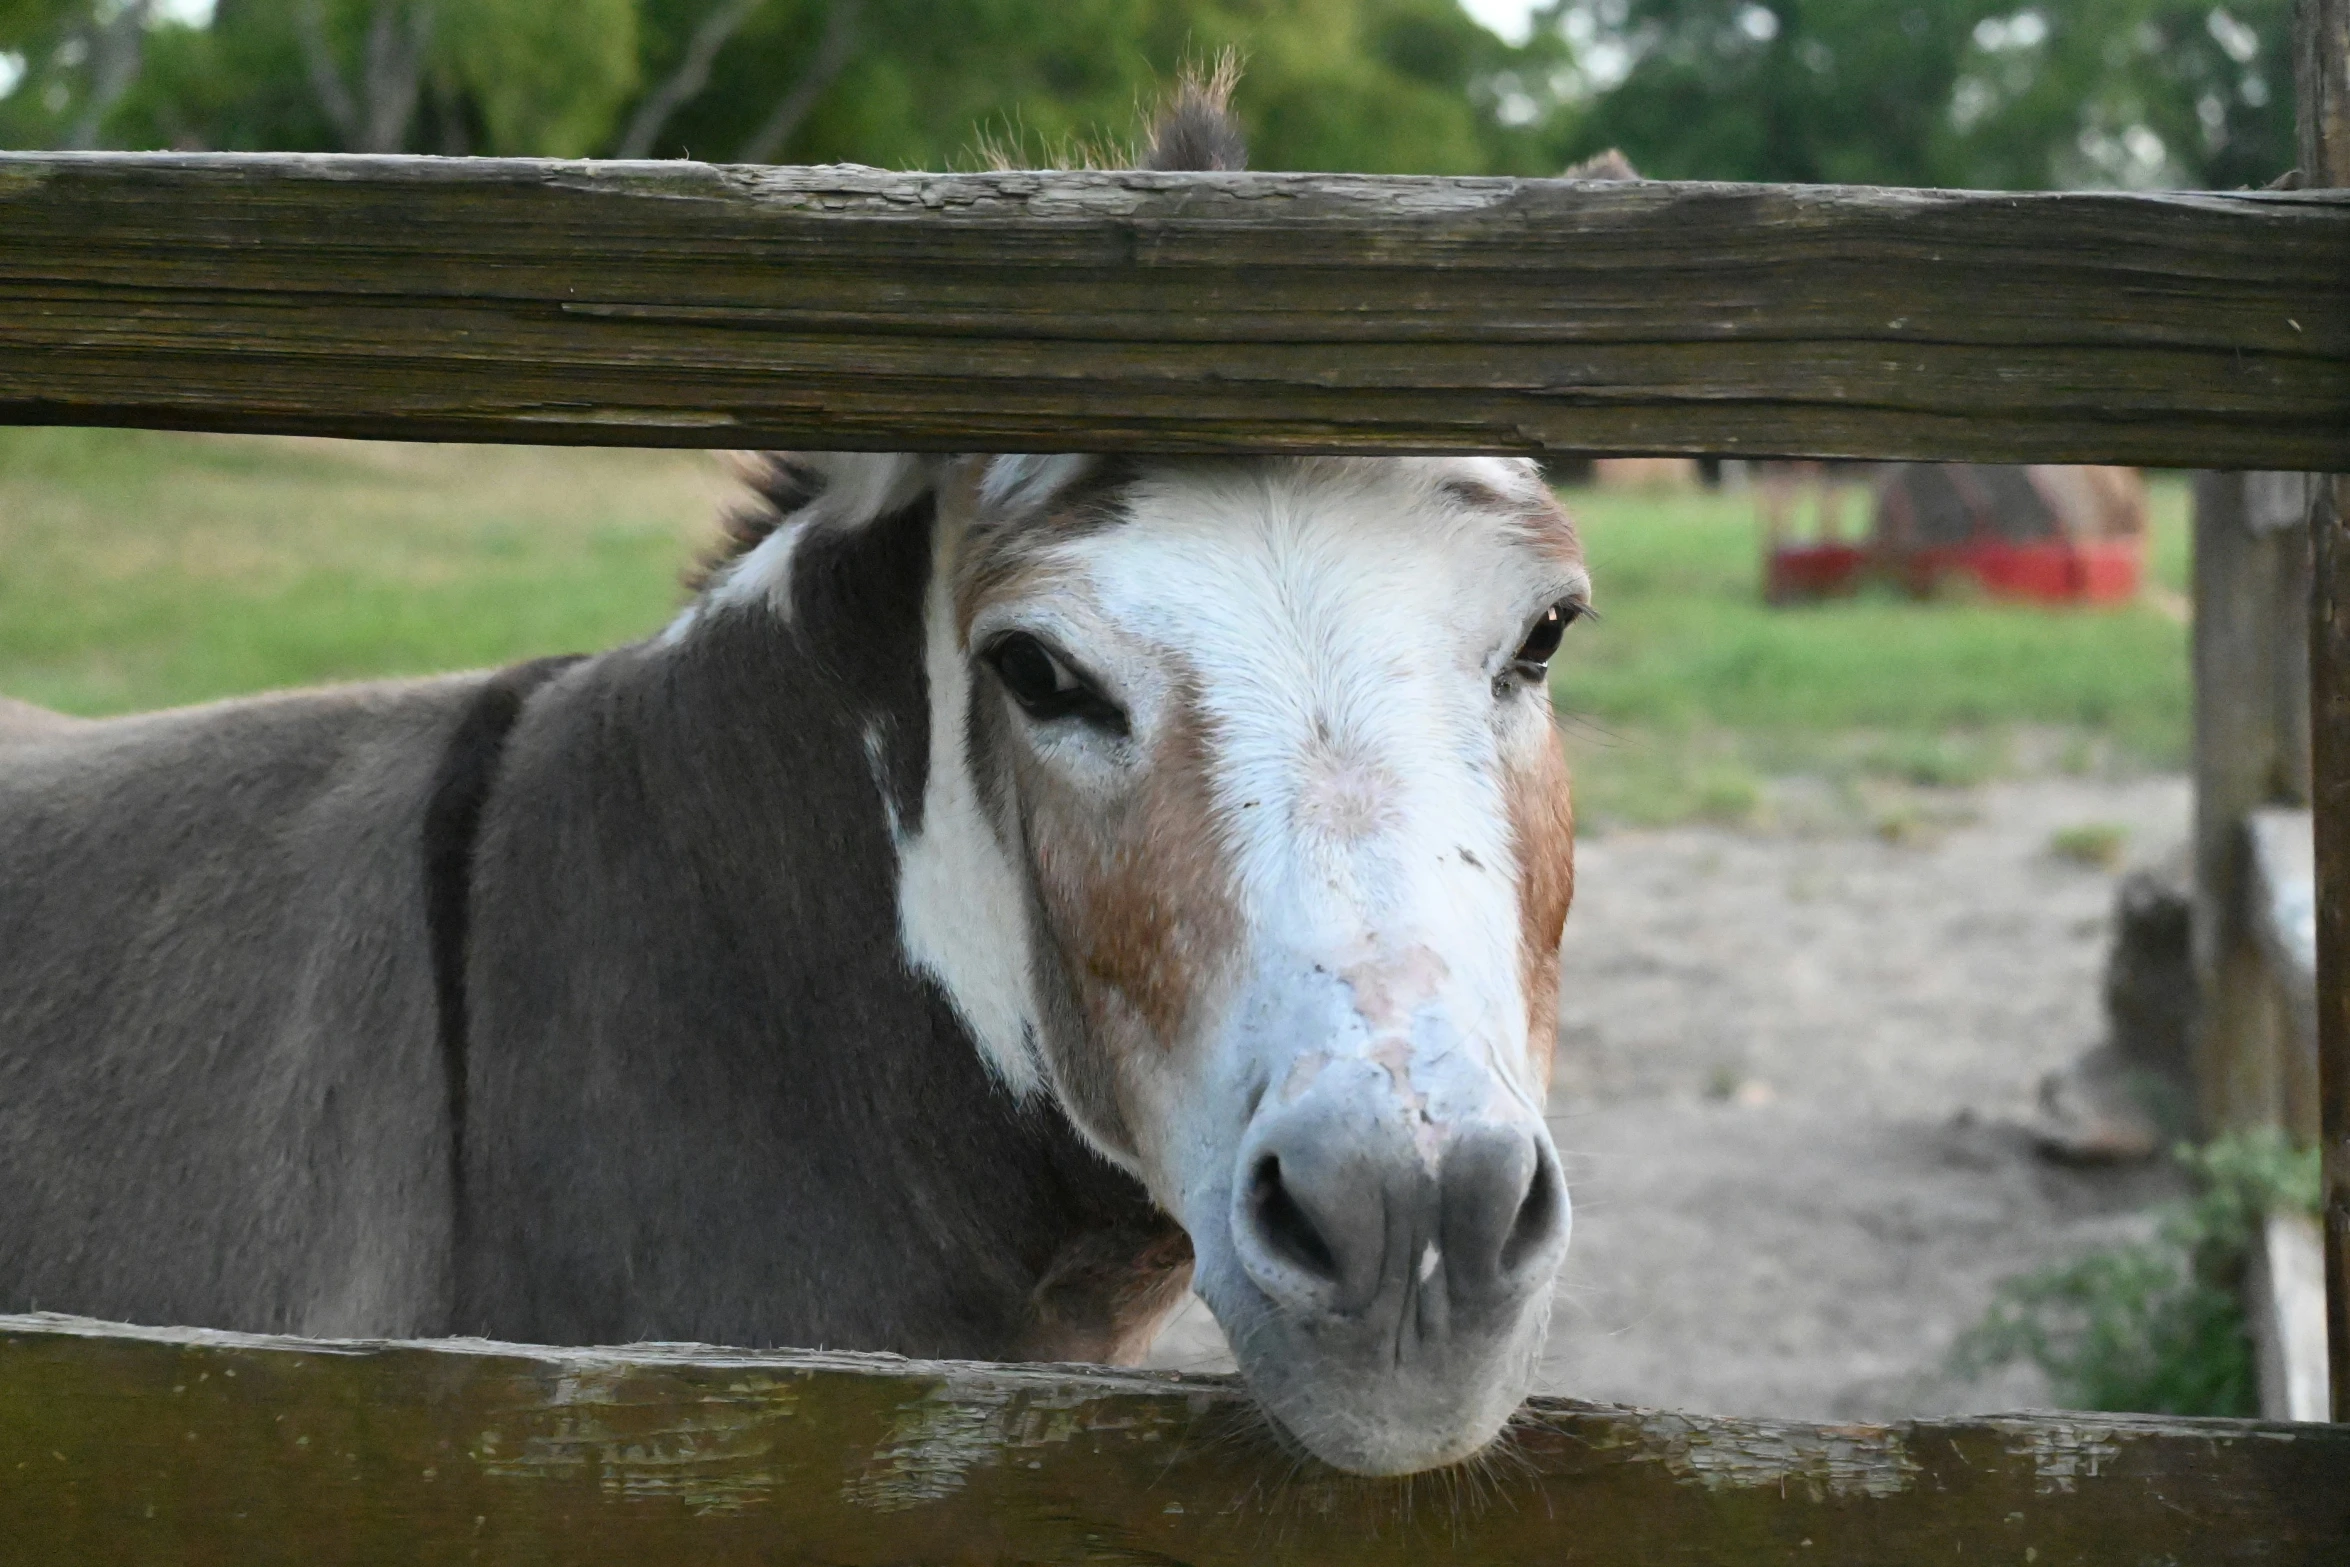 a horse looks over the top of the fence